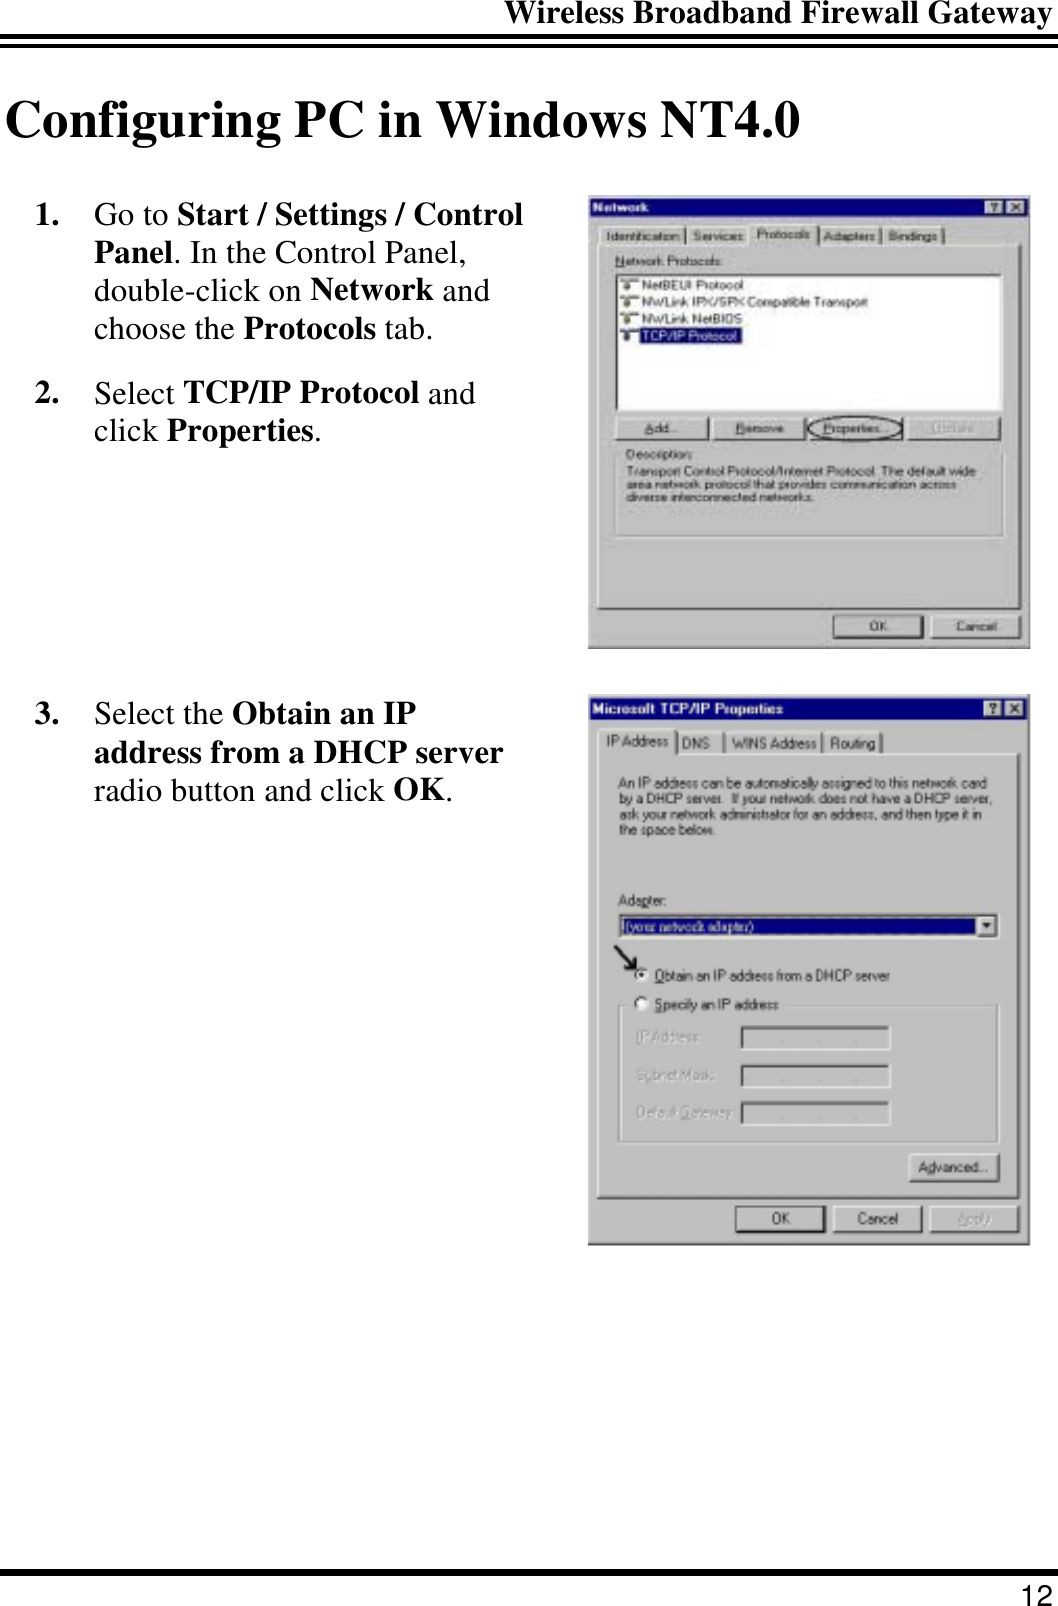 Wireless Broadband Firewall Gateway 12 Configuring PC in Windows NT4.0 1.  Go to Start / Settings / Control Panel. In the Control Panel, double-click on Network and choose the Protocols tab. 2.  Select TCP/IP Protocol and click Properties.  3.  Select the Obtain an IP address from a DHCP server radio button and click OK.  